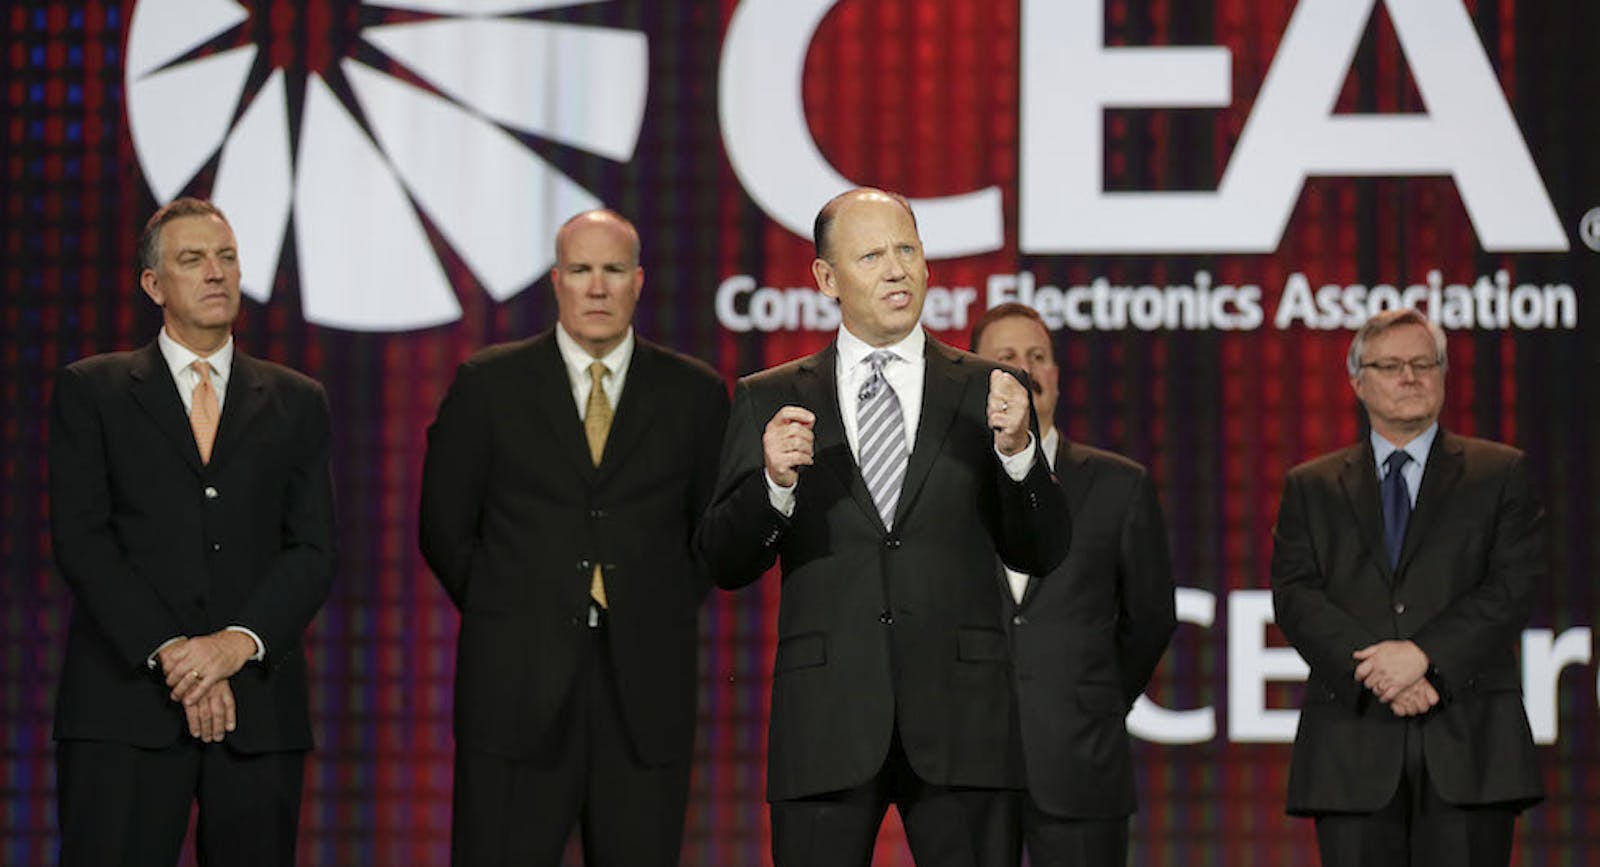 Warner Bros. executive Ron Sanders at CES in 2013 when UltraViolet was announced. Photo by AP.